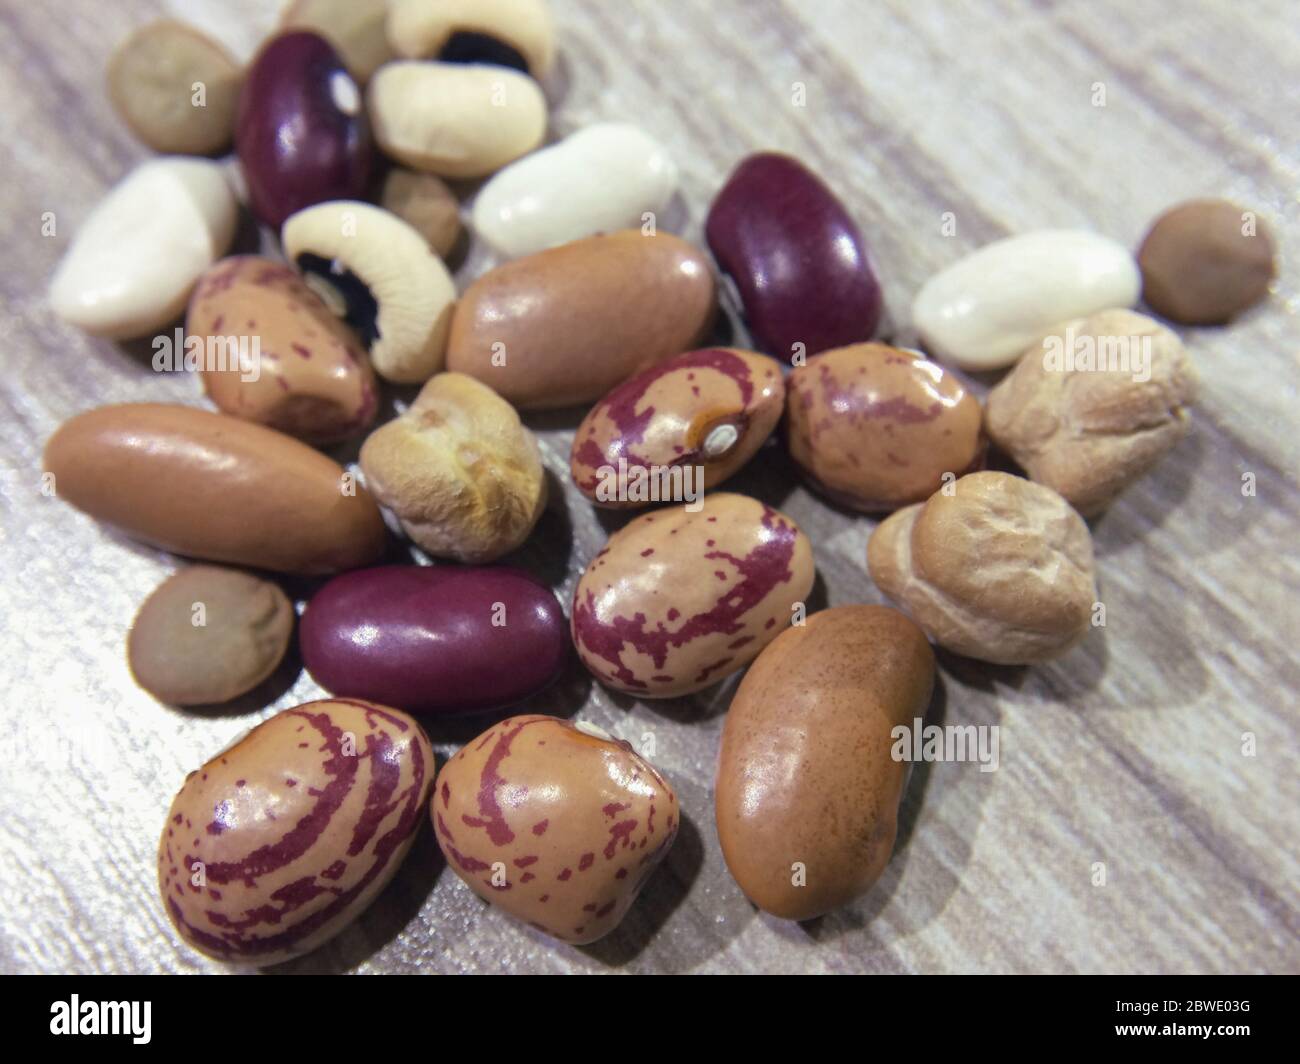 All kinds of beans on wooden background. red beans, broad beans, lentils, black-eyed pea or cowpea, Navy bean, local bean, cheakpea beans, pinto bean. Stock Photo